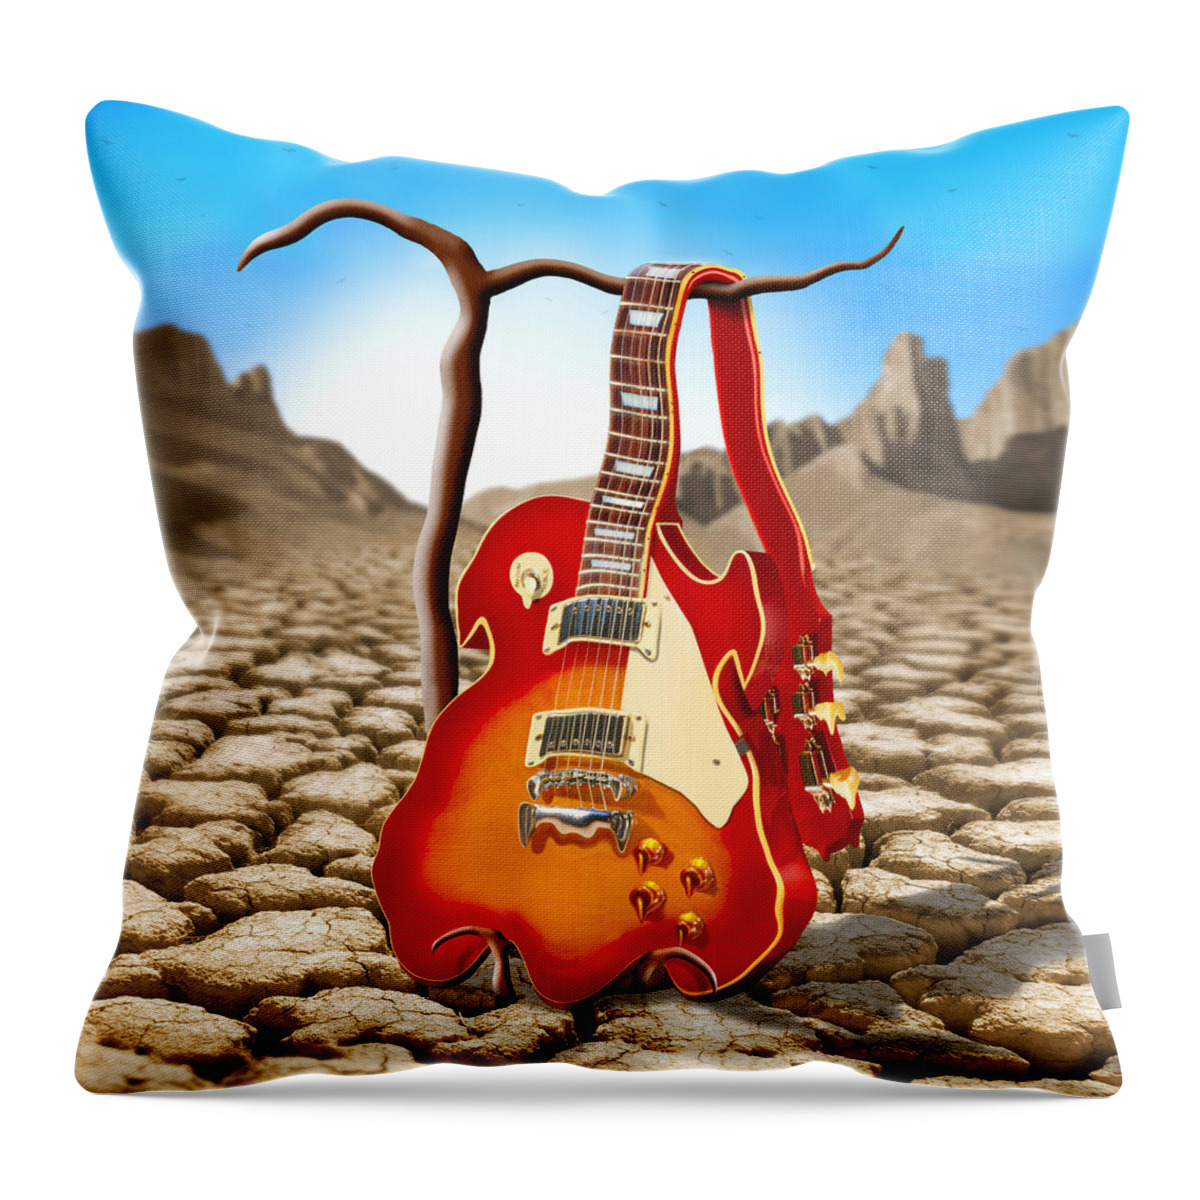 Surrealism Throw Pillow featuring the photograph Soft Guitar II by Mike McGlothlen